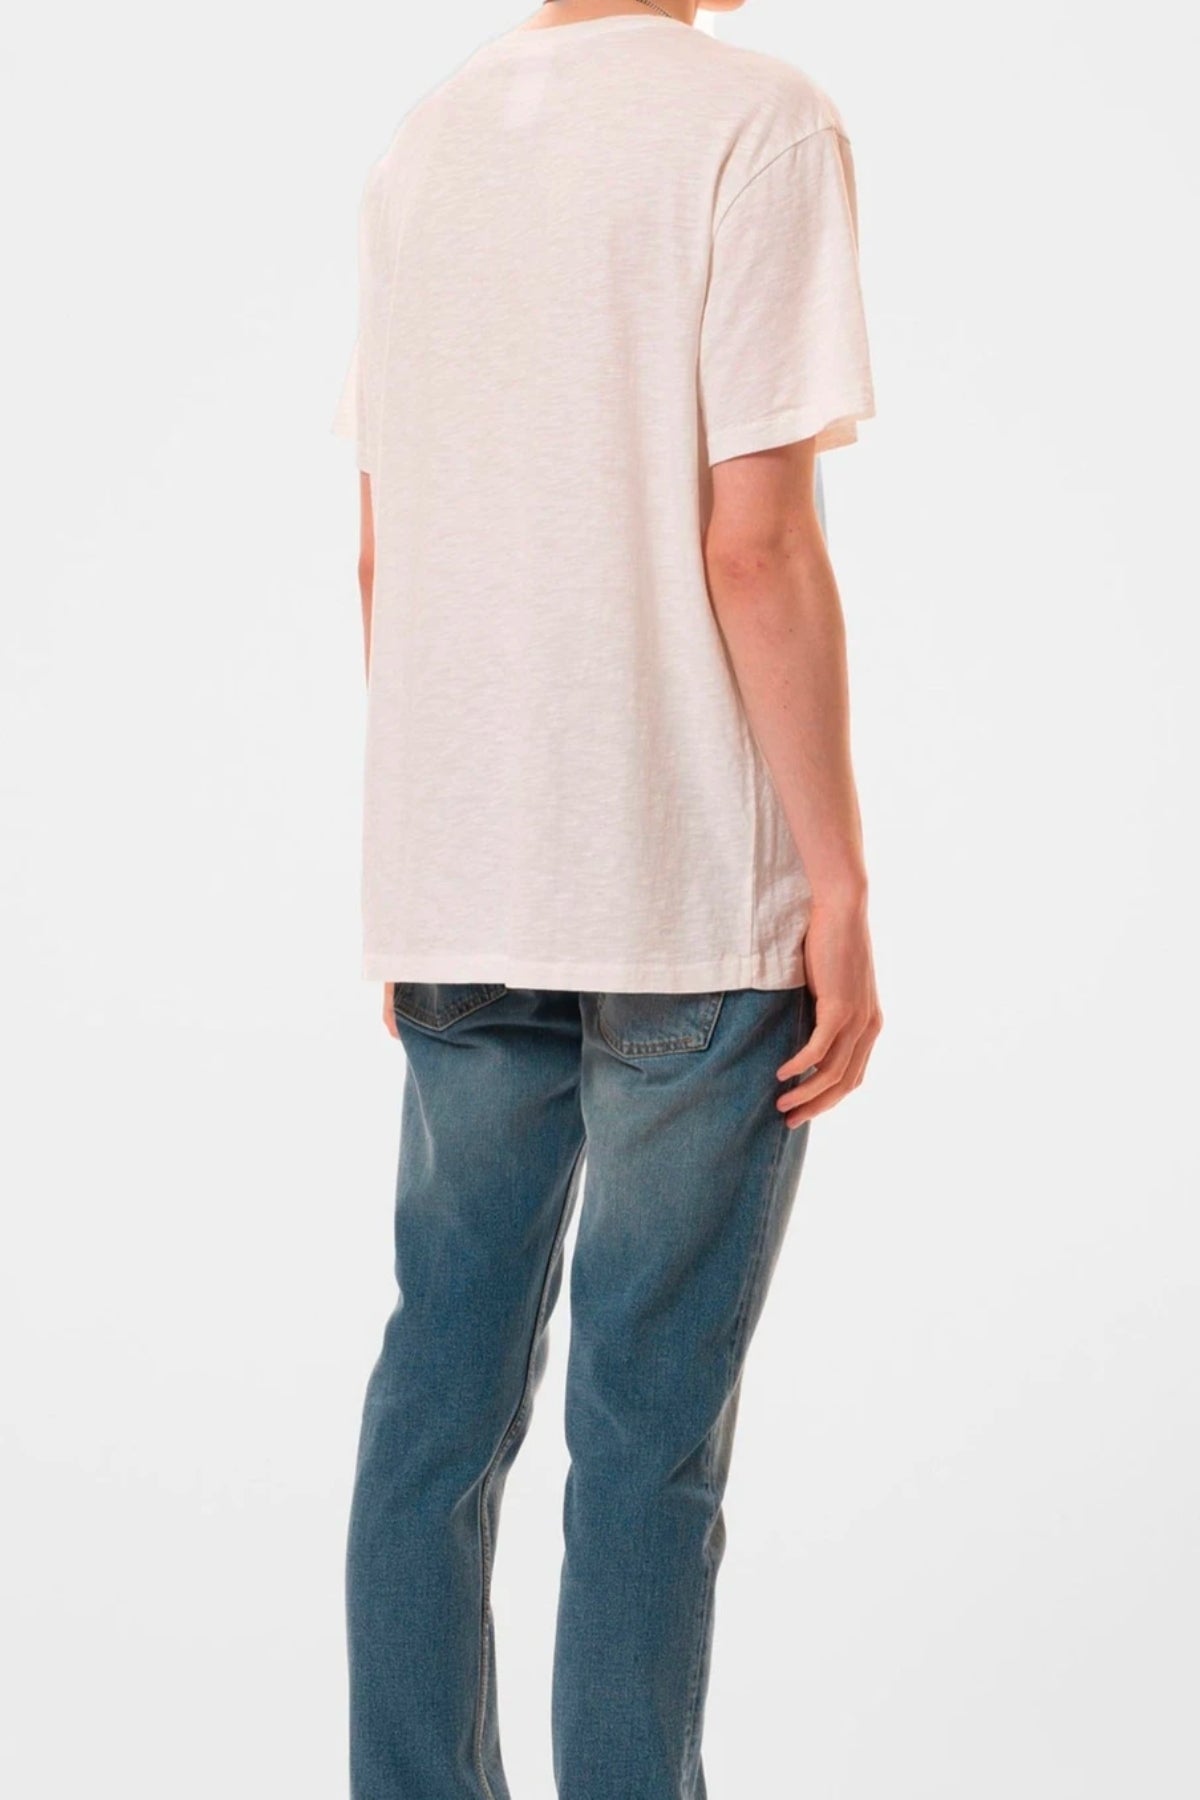 T-shirt Roffe Tee - Nudie Jeans